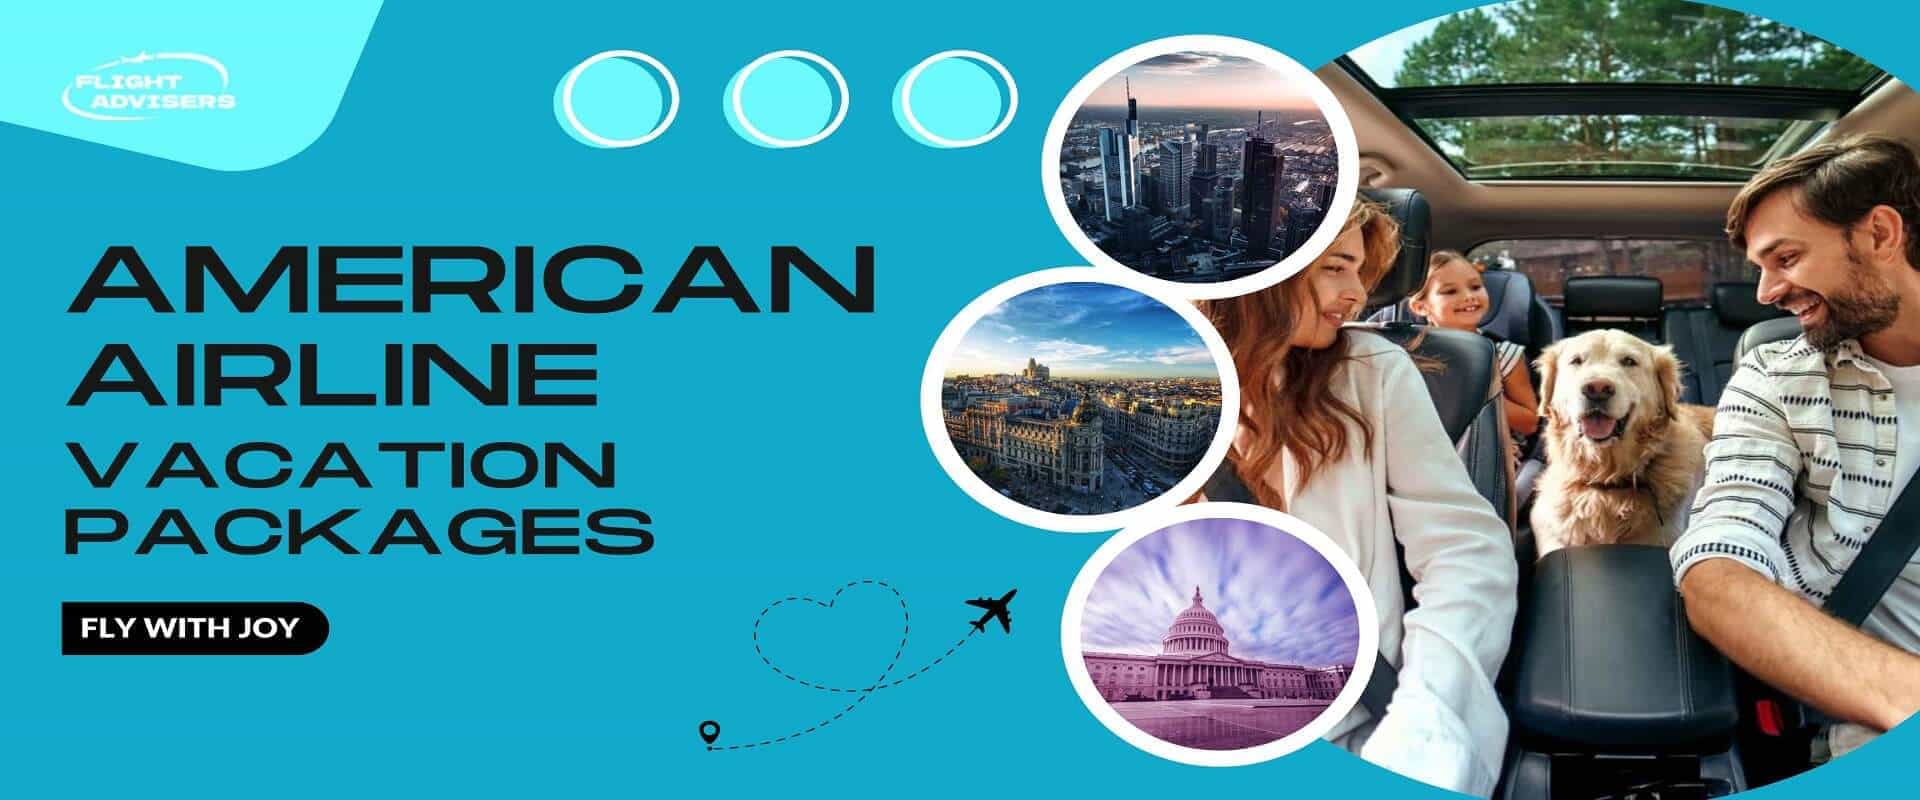 american-airlines-vacation-packages